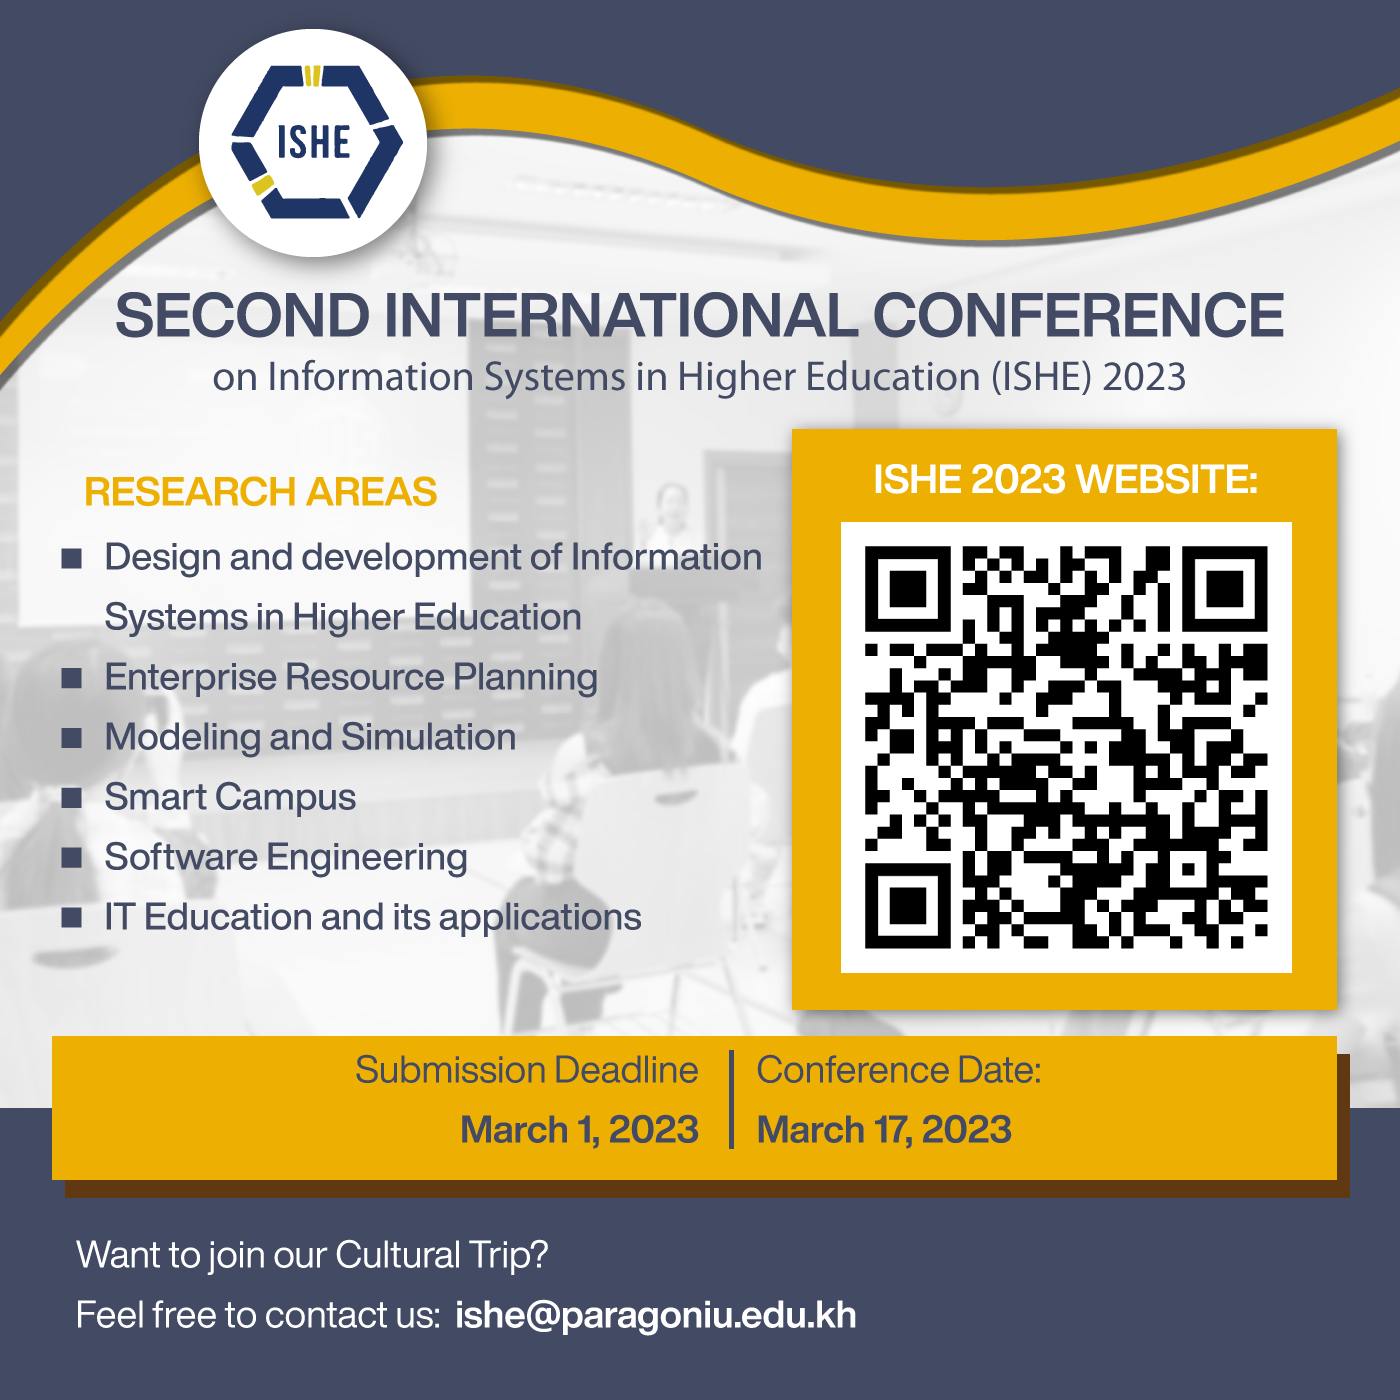 Second International Conference on Information Systems in Higher Education (ISHE)